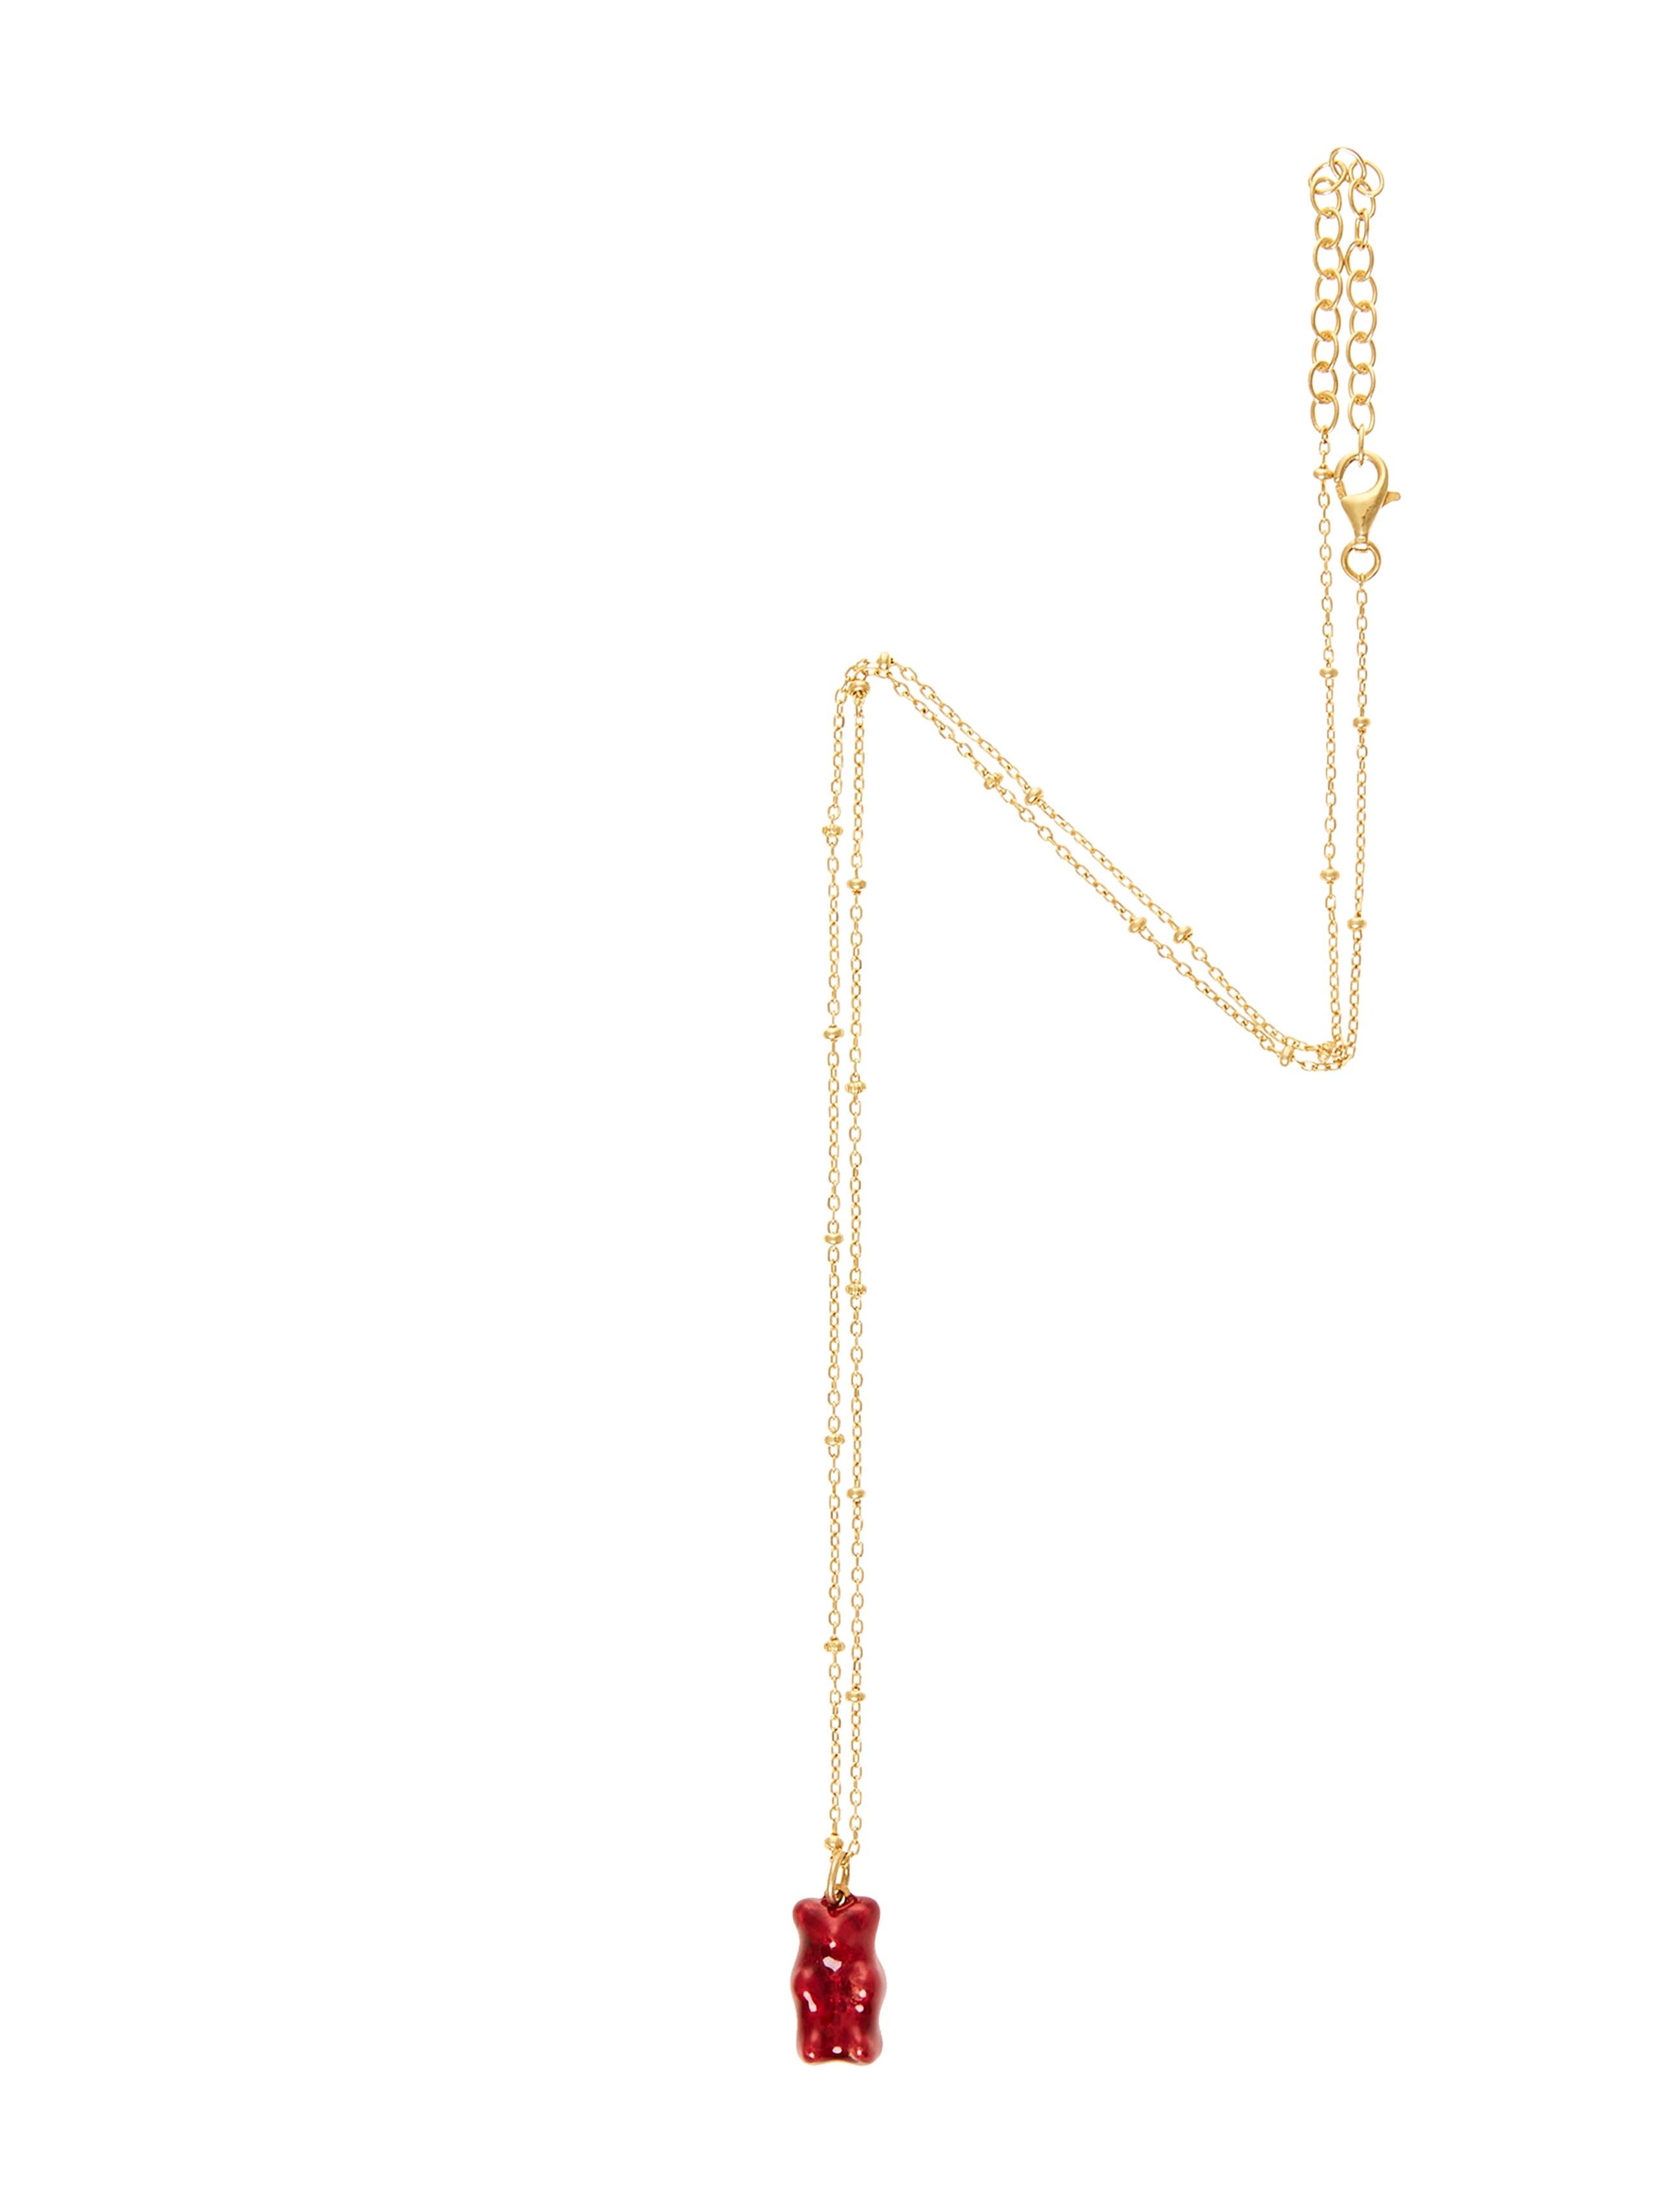 18k gold plated silver  gummy bear pendant for kids  on silver gold plated  chain with transparent red enamel coverage.

The Gummy Project by Maggoosh is a capsule collection inspired by the designer's life in New York City and her passion for